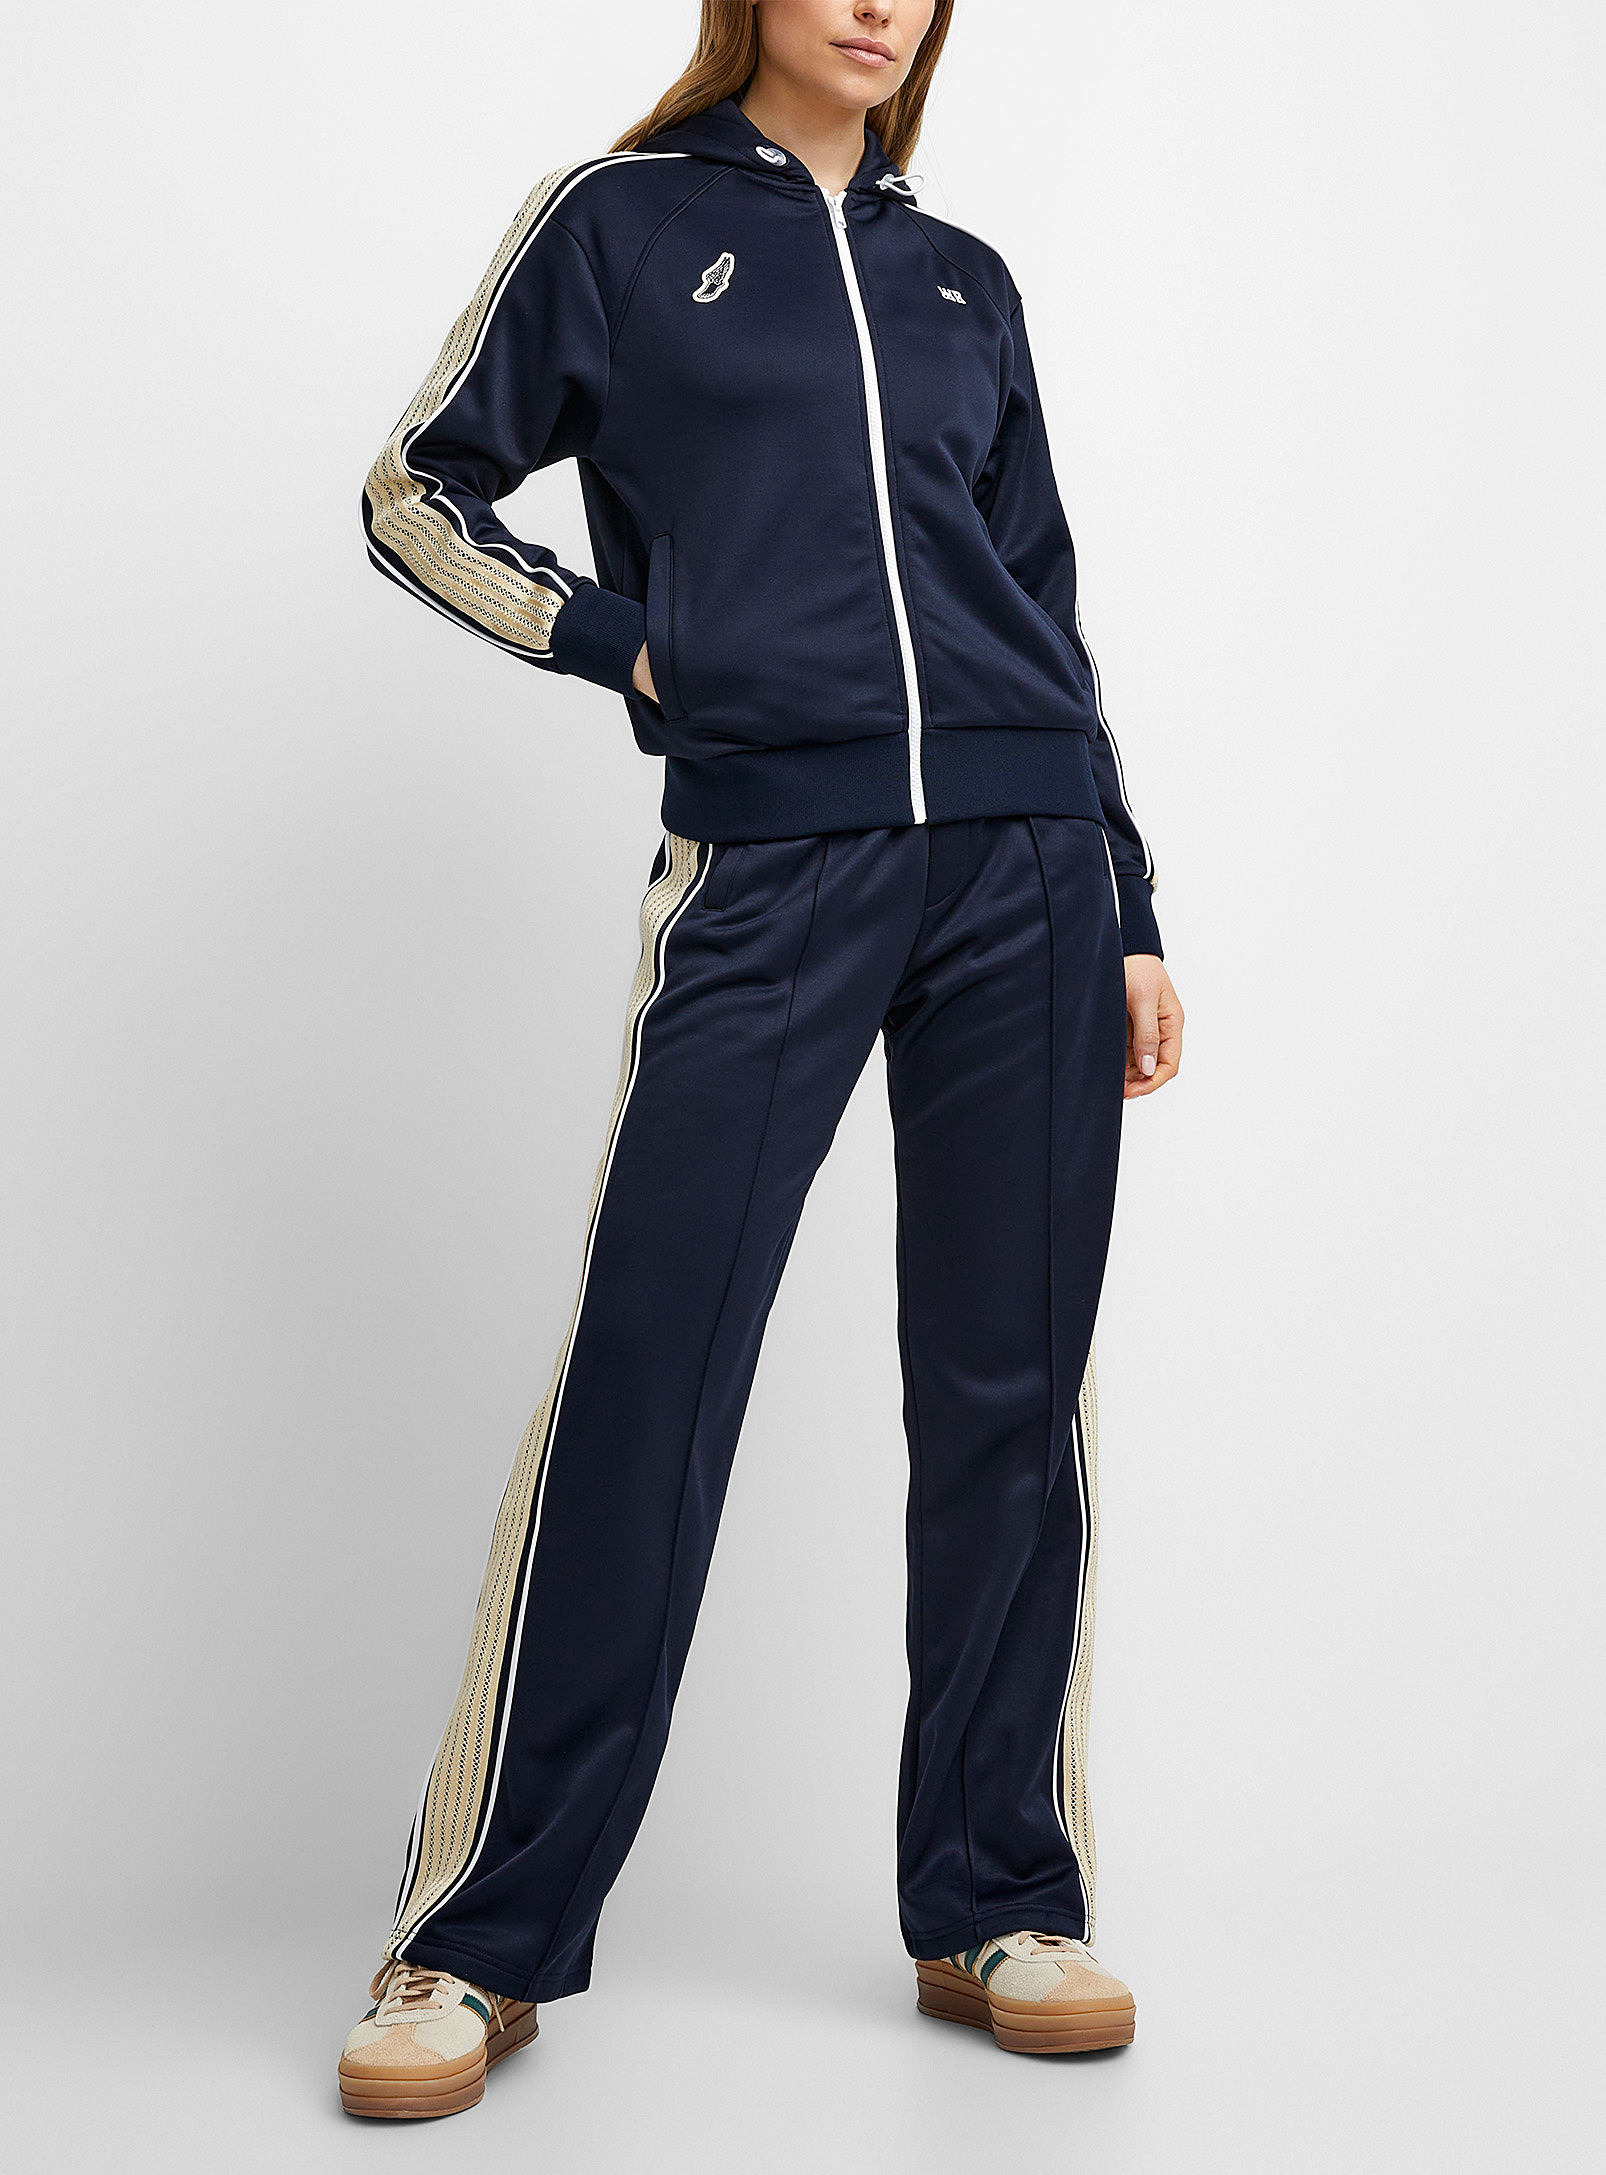 Wales Bonner Mantra Track Pant In Marine Blue